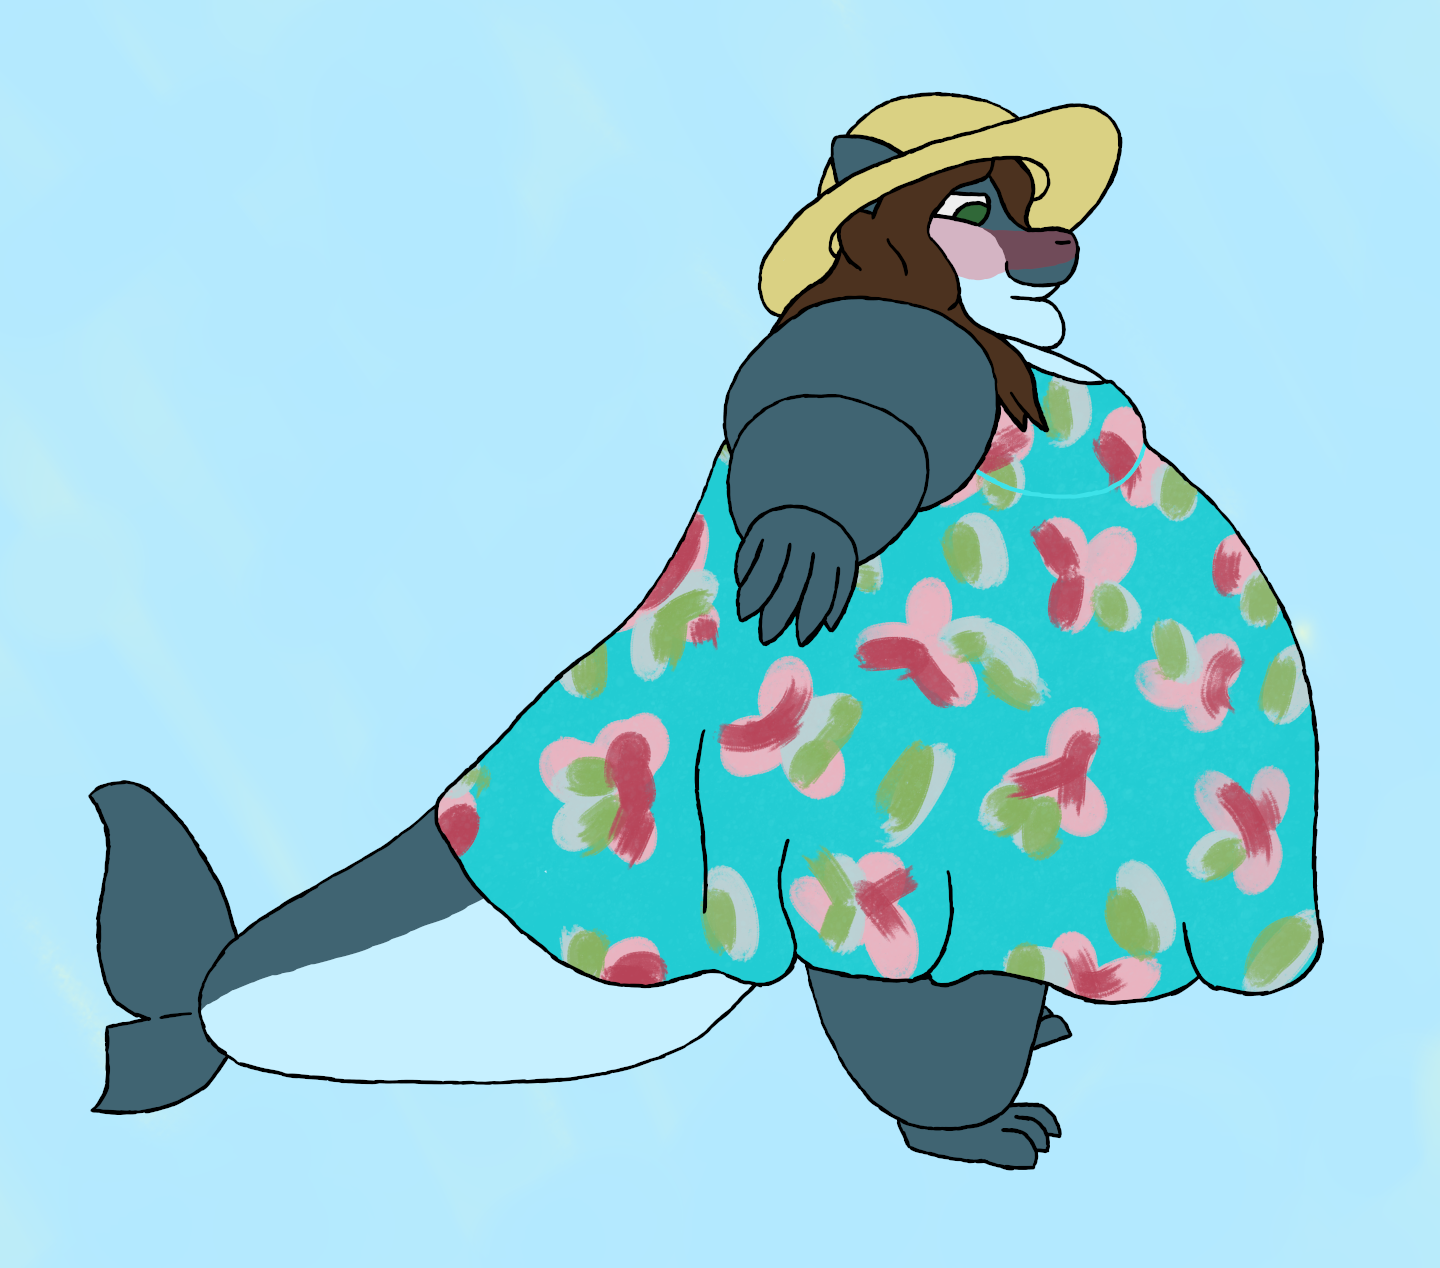 A very fat femboy shark wearing a turquoise midi-dress with floral print. He's also wearing a sun hat. He's smiling and blushing while looking like he's viewing himself in a mirror.